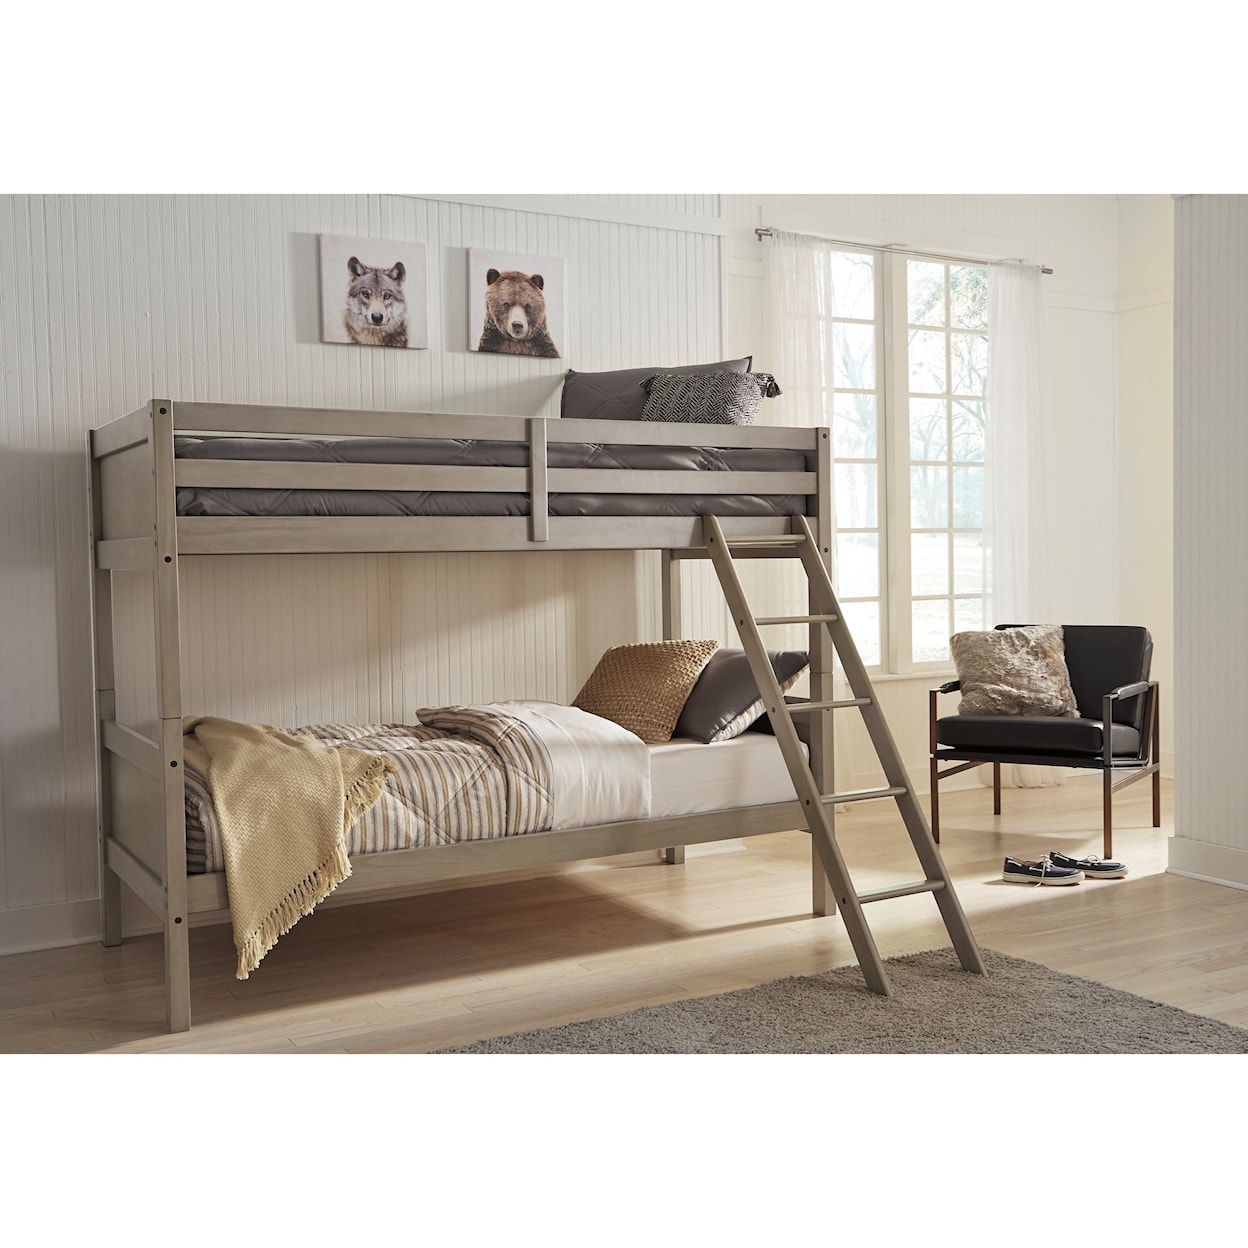 Signature Design by Ashley Furniture Lettner Twin/Twin Bunk Bed w/ Ladder